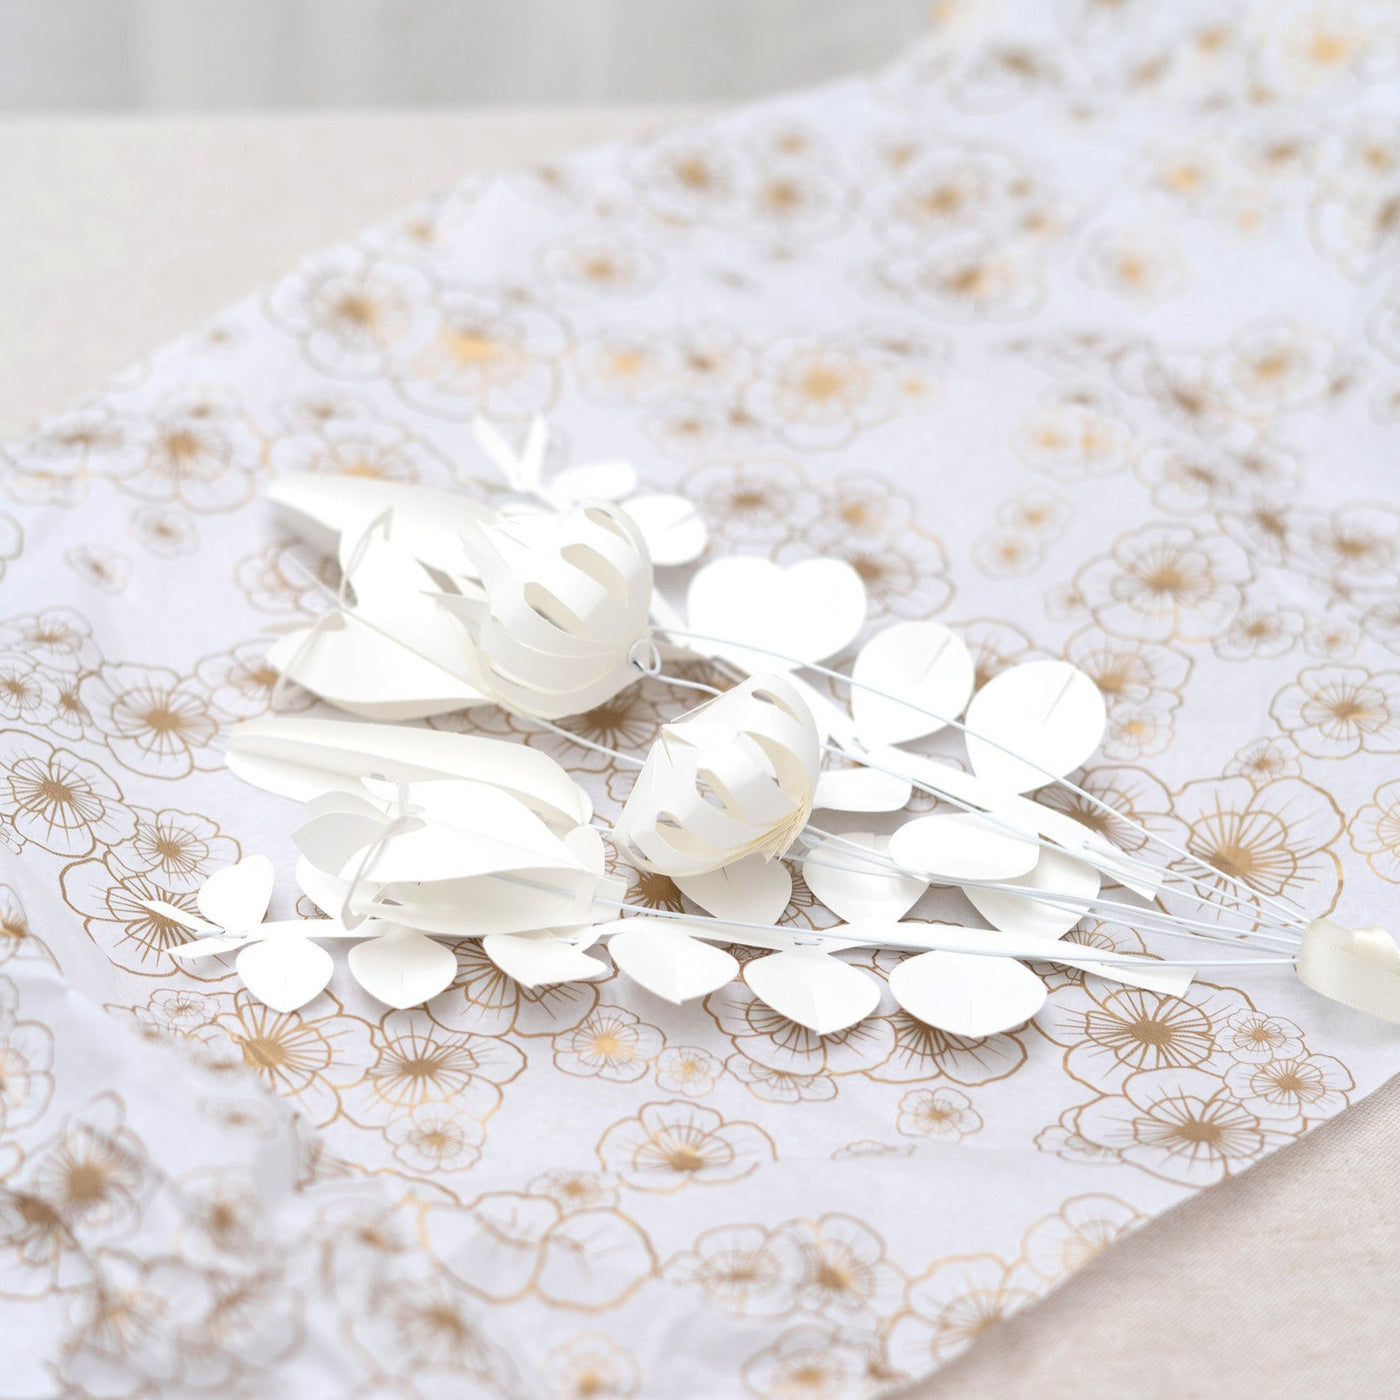 DIY Paper 'Field' Flowers Small - White